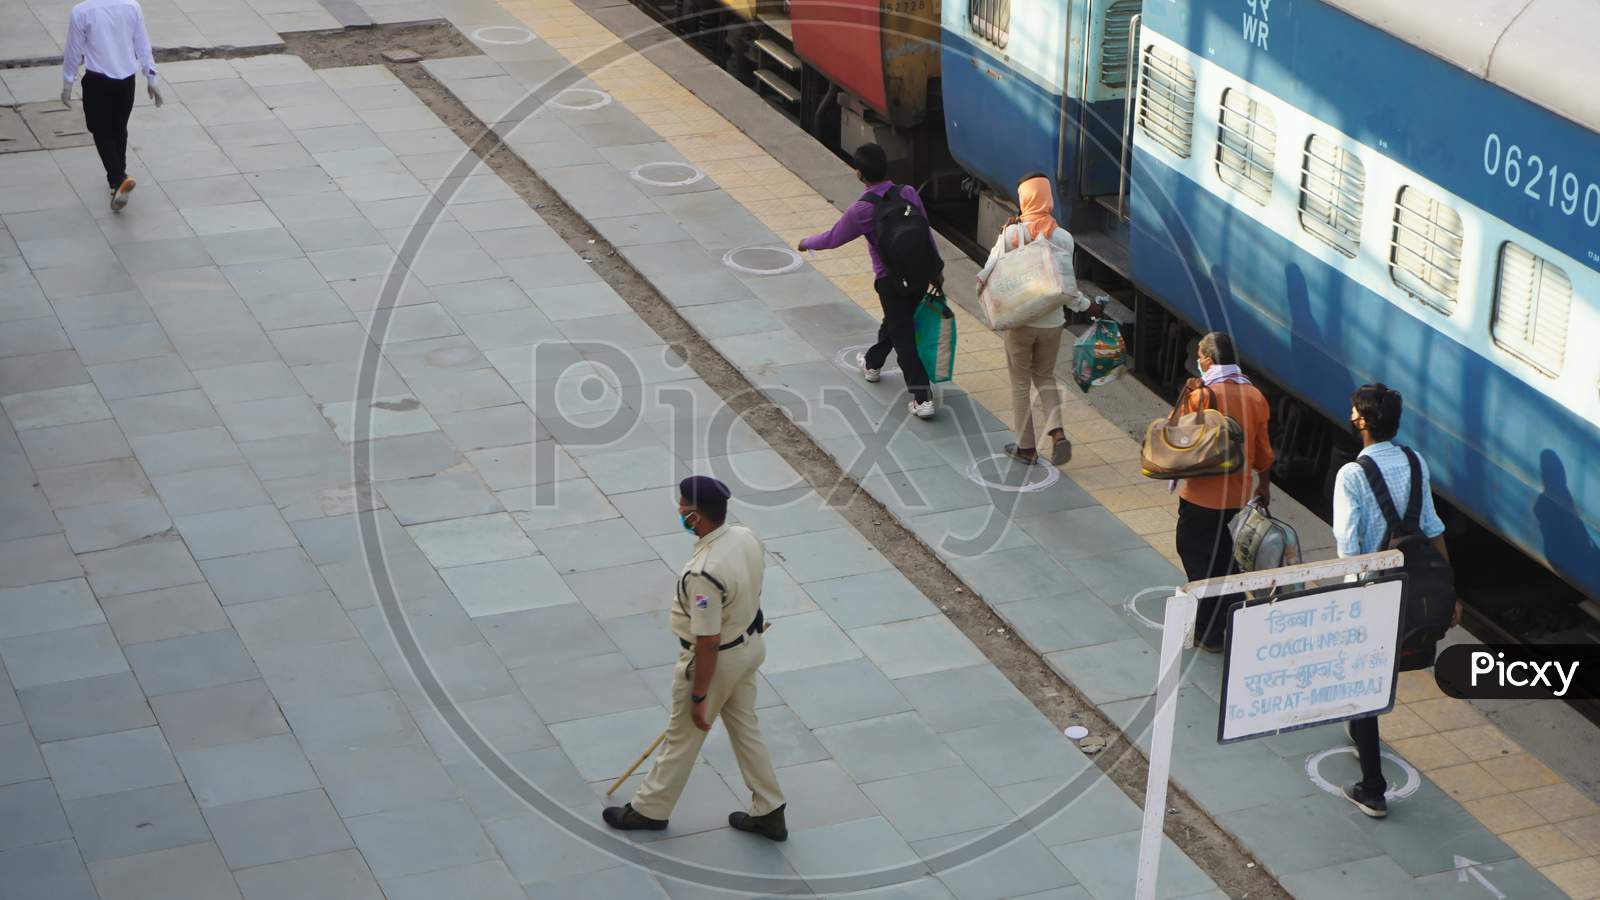 MIGRANT WORKERS. Indian migrant workers during COVID 19 Corona Virus nationwide lockdown returning back home special trains Bus Railway station. Police on duty.